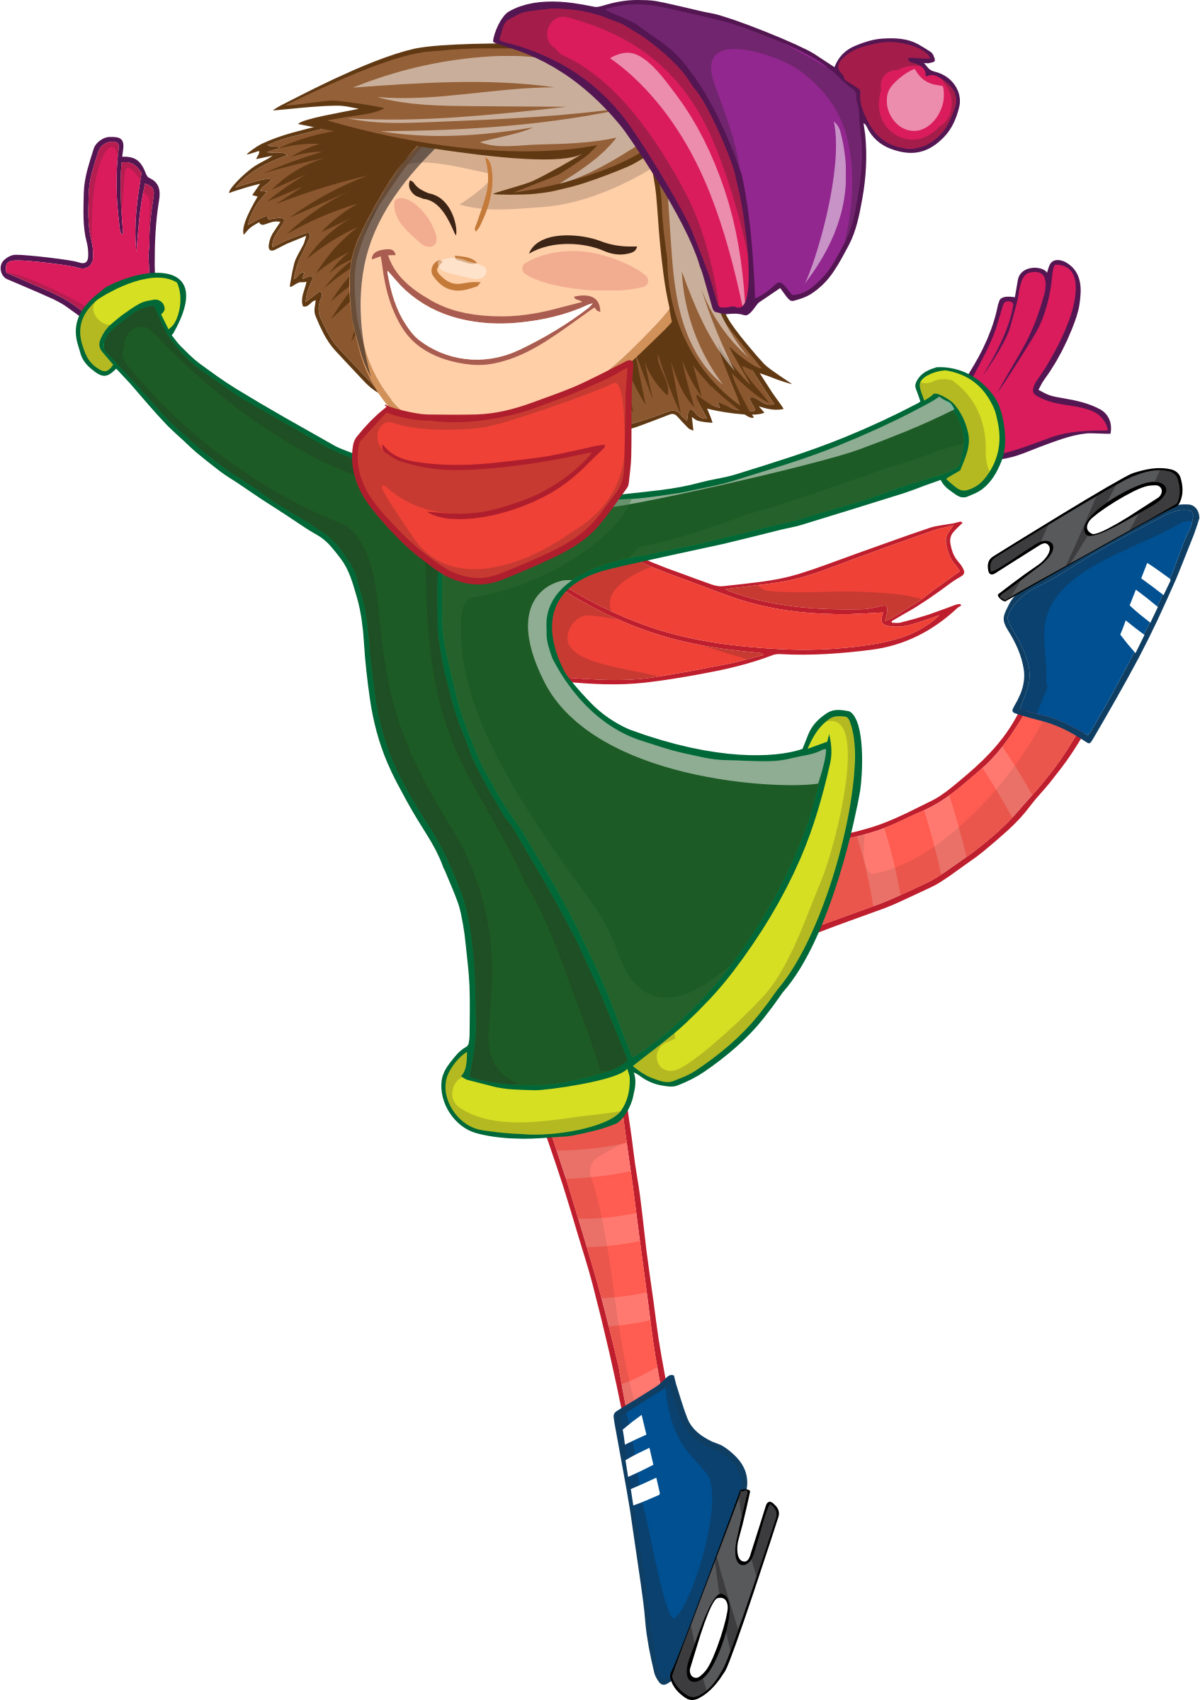 3 Ways To Have Fun & Keep Active This Winter With PCHSearch&Win